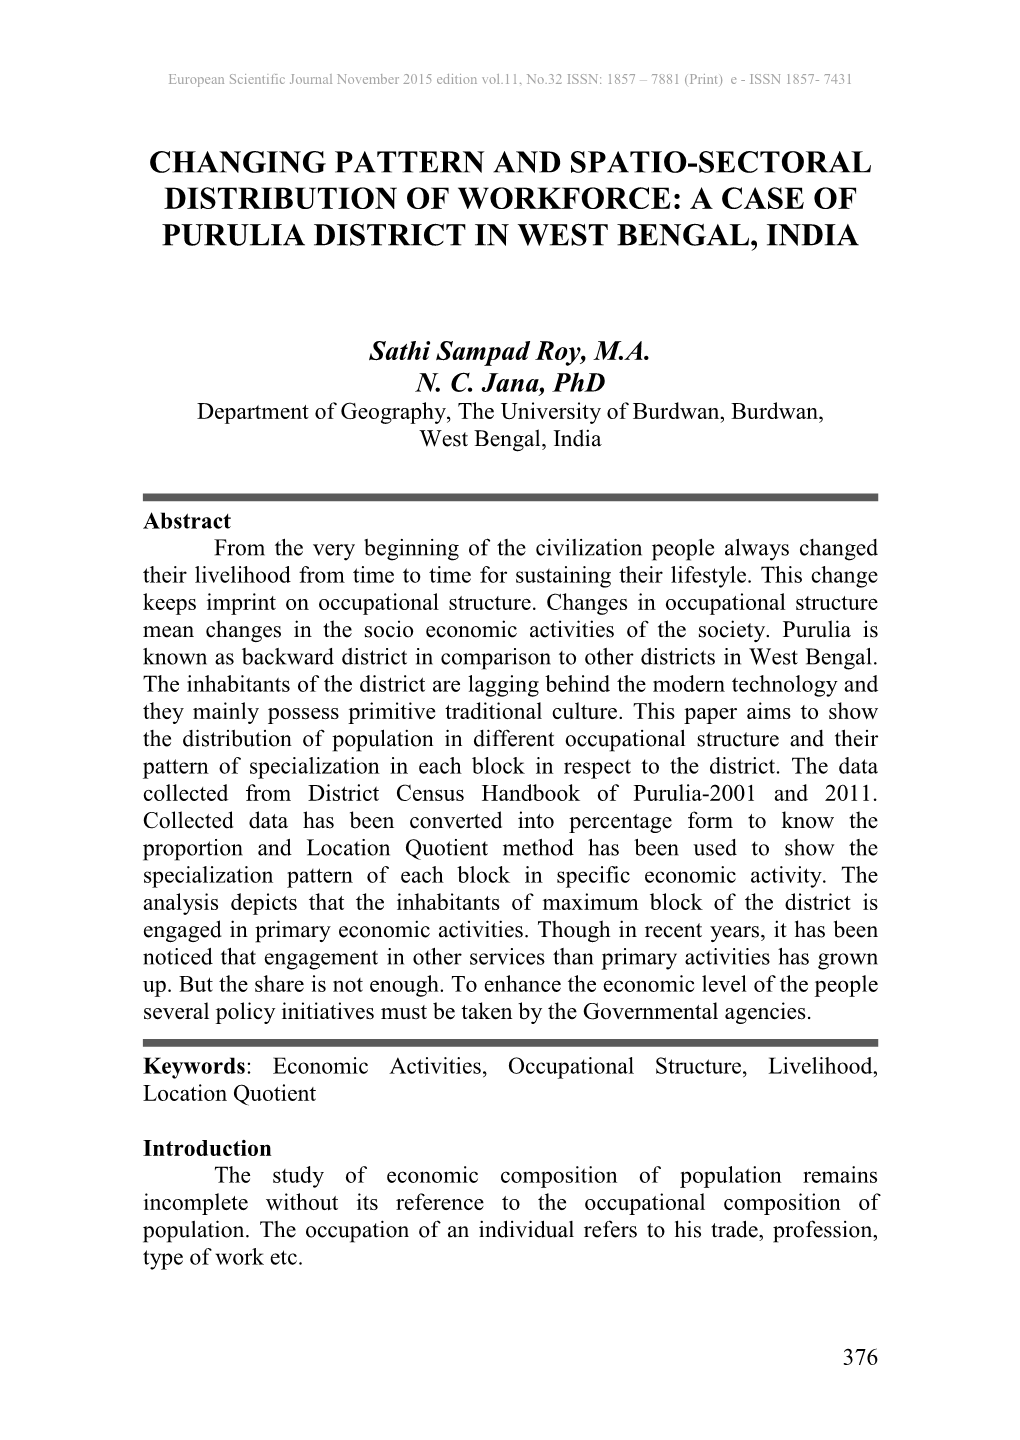 A Case of Purulia District in West Bengal, India